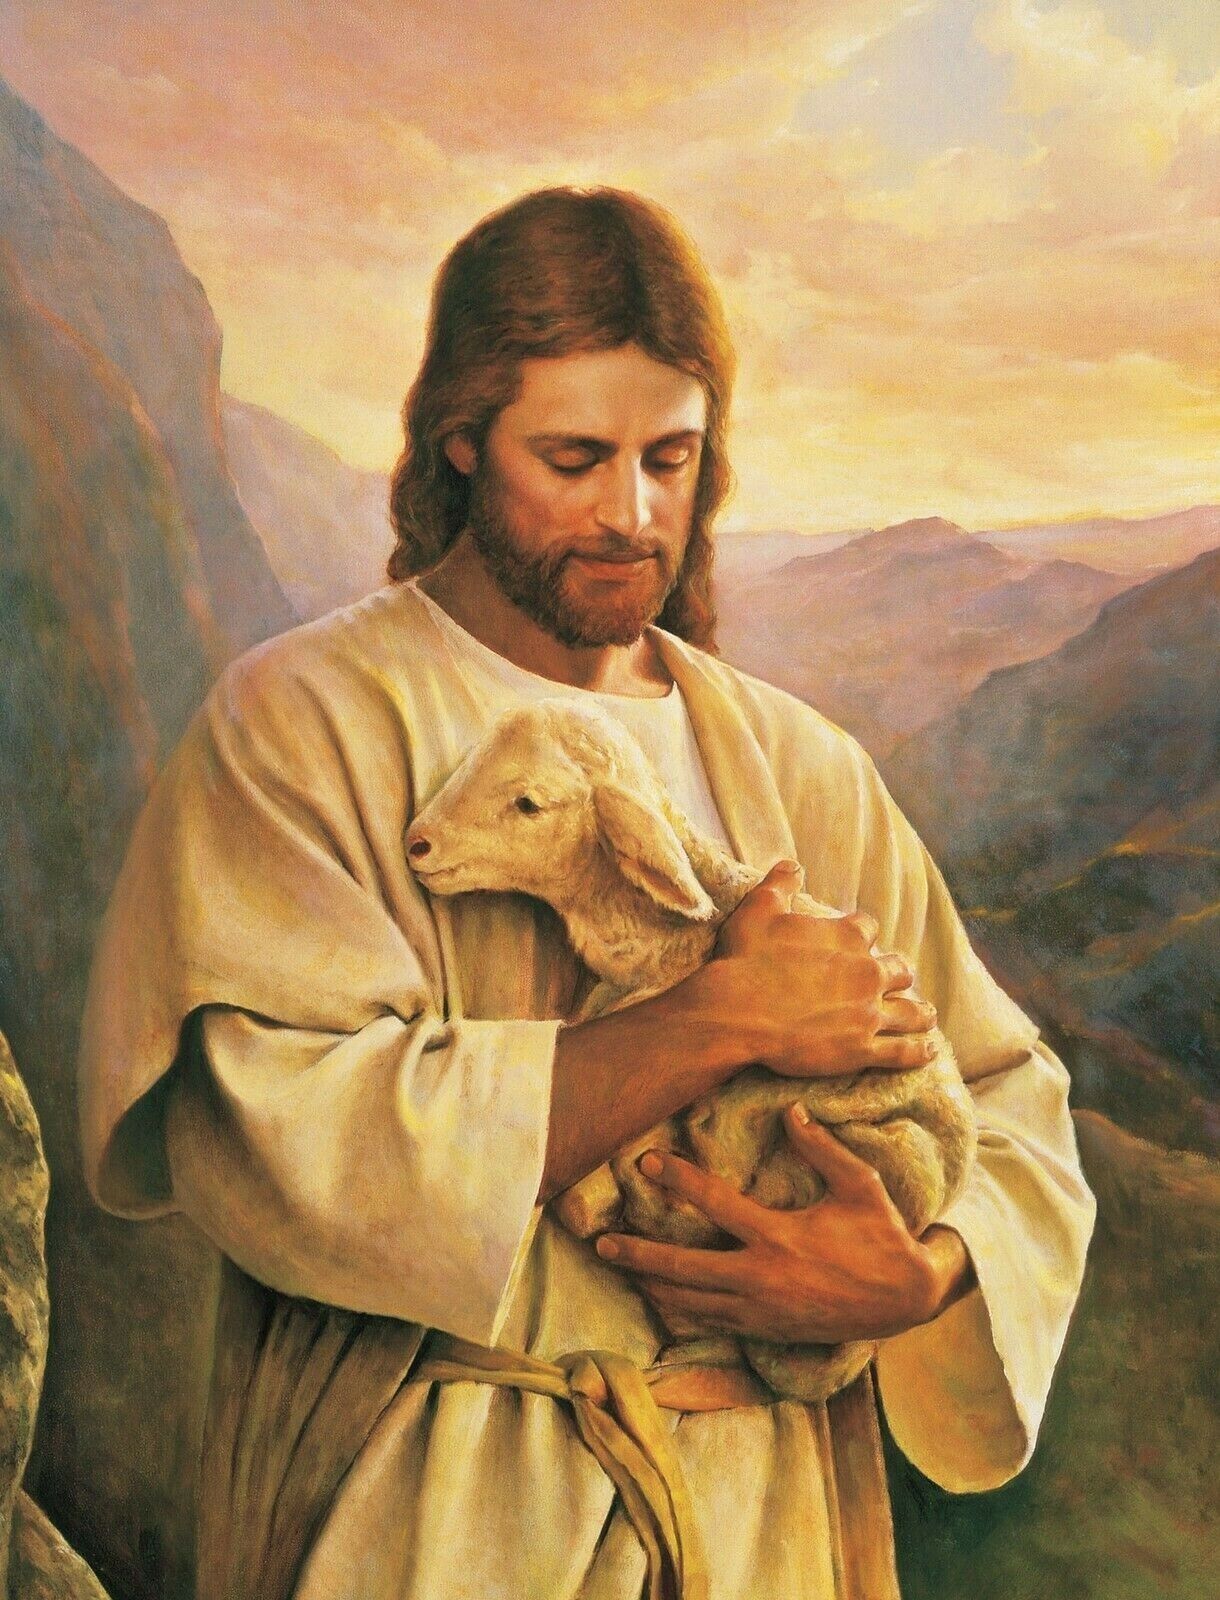 JESUS CARRYING A LOST LAMB 8X10 CHRISTIAN ART GLOSSY PHOTO PICTURE